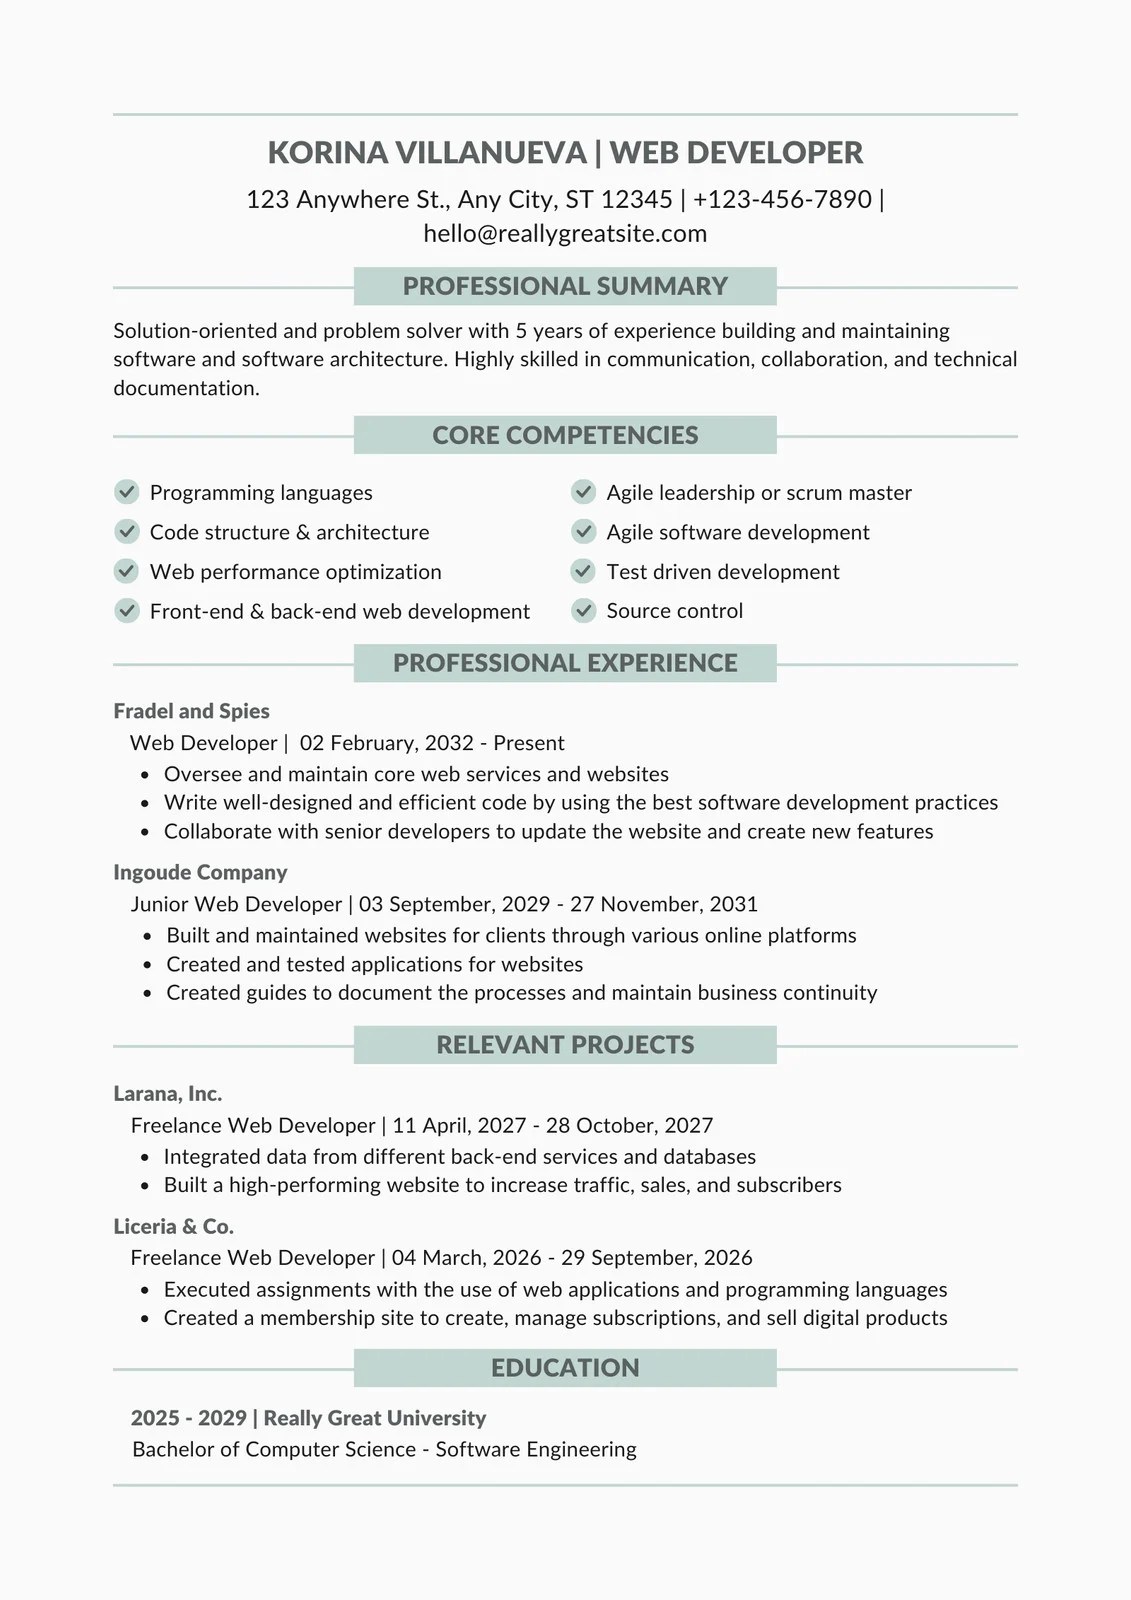 How To Write Resumes Professionally